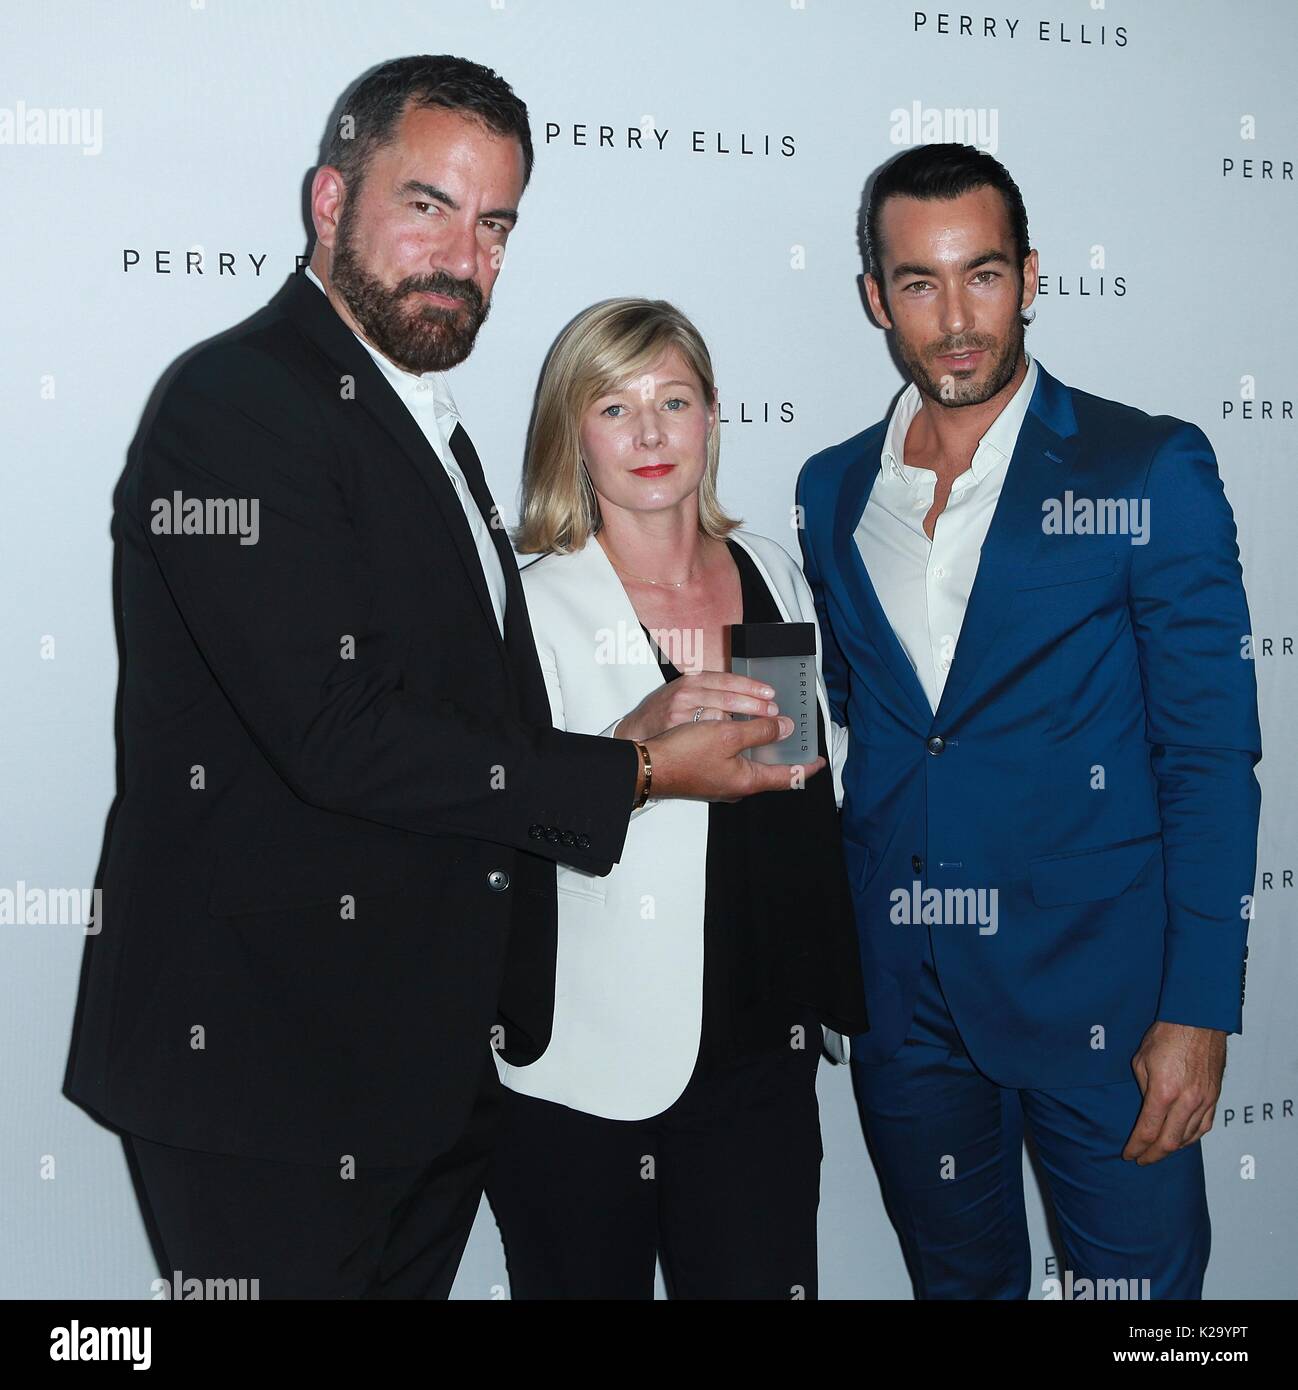 New York, NY, USA. 29th Aug, 2017. Michael Maccari and Aaron Diaz unveil the new Perry Ellis fragrance at Kola House on August 29, 2017 in New York City. Credit: Diego Corredor/Media Punch/Alamy Live News Stock Photo